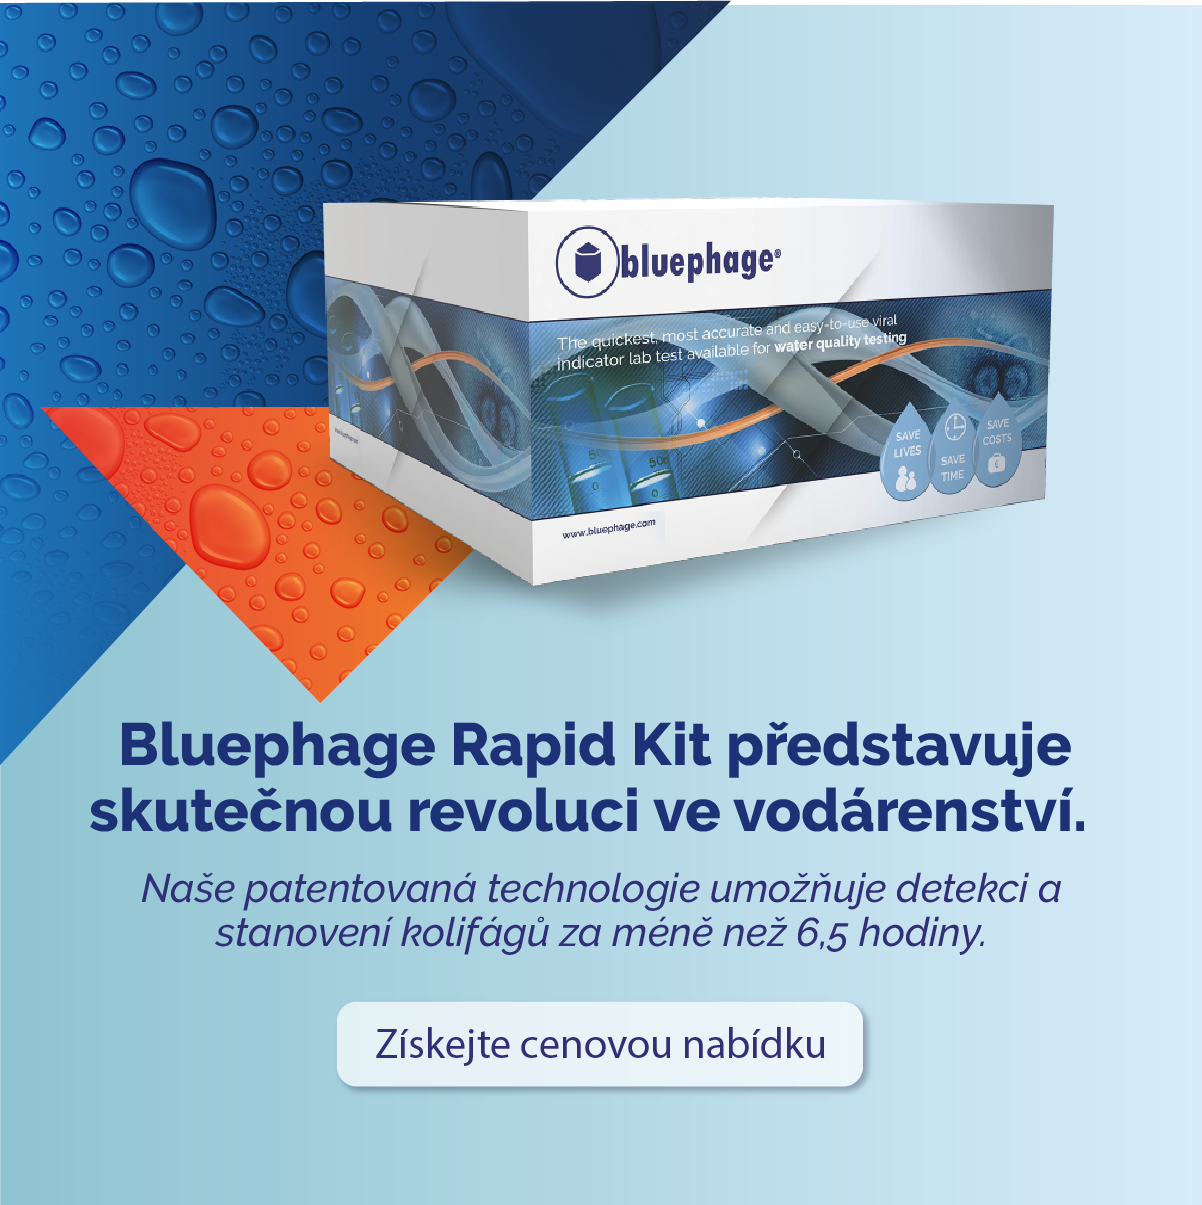 Rapid Kit means a true  Revolution in the water industry